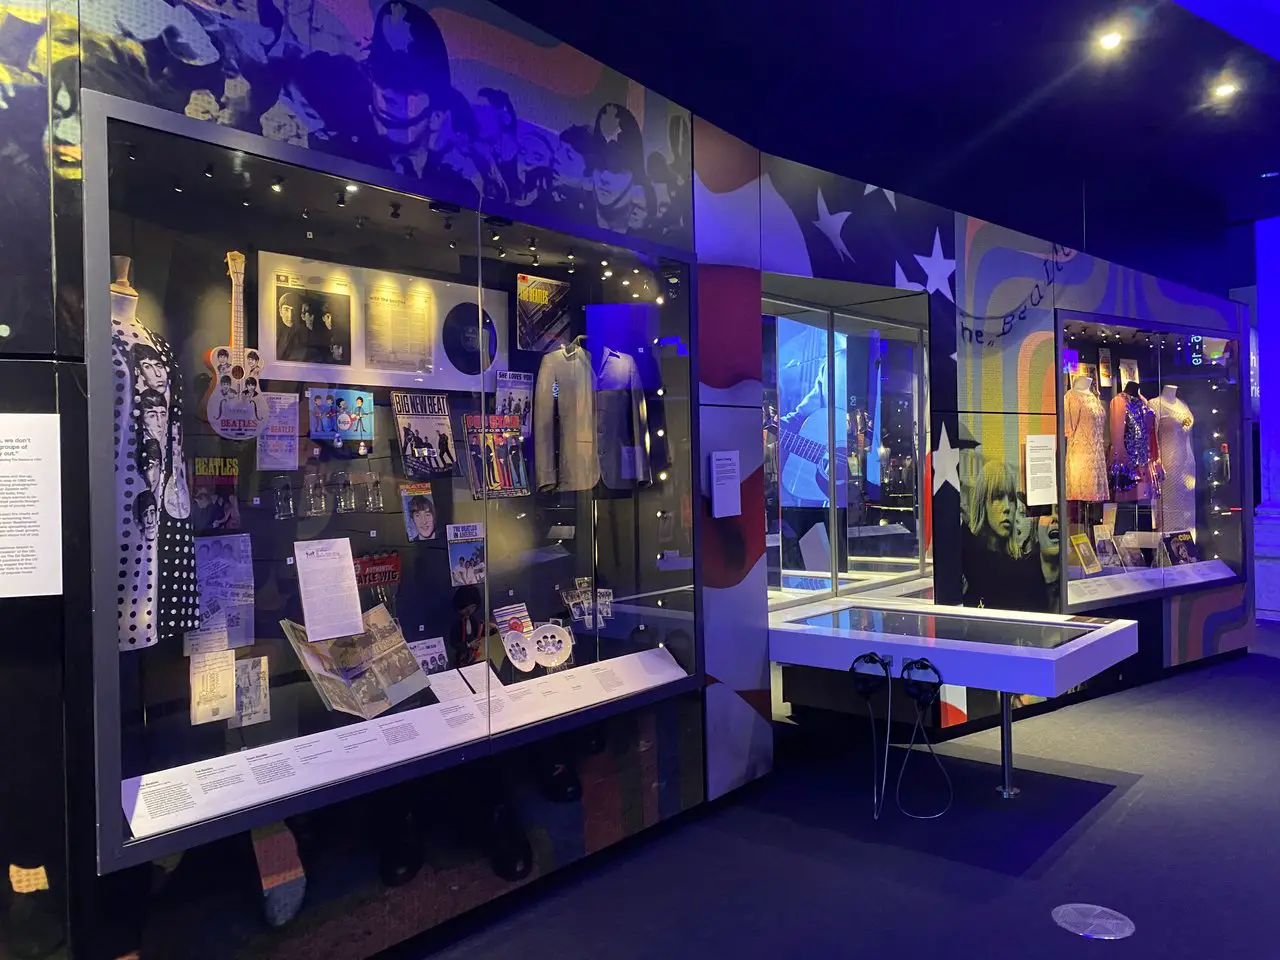 Display cabinet inside the British Music Experience in Liverpool showing Beatles memorabilia.